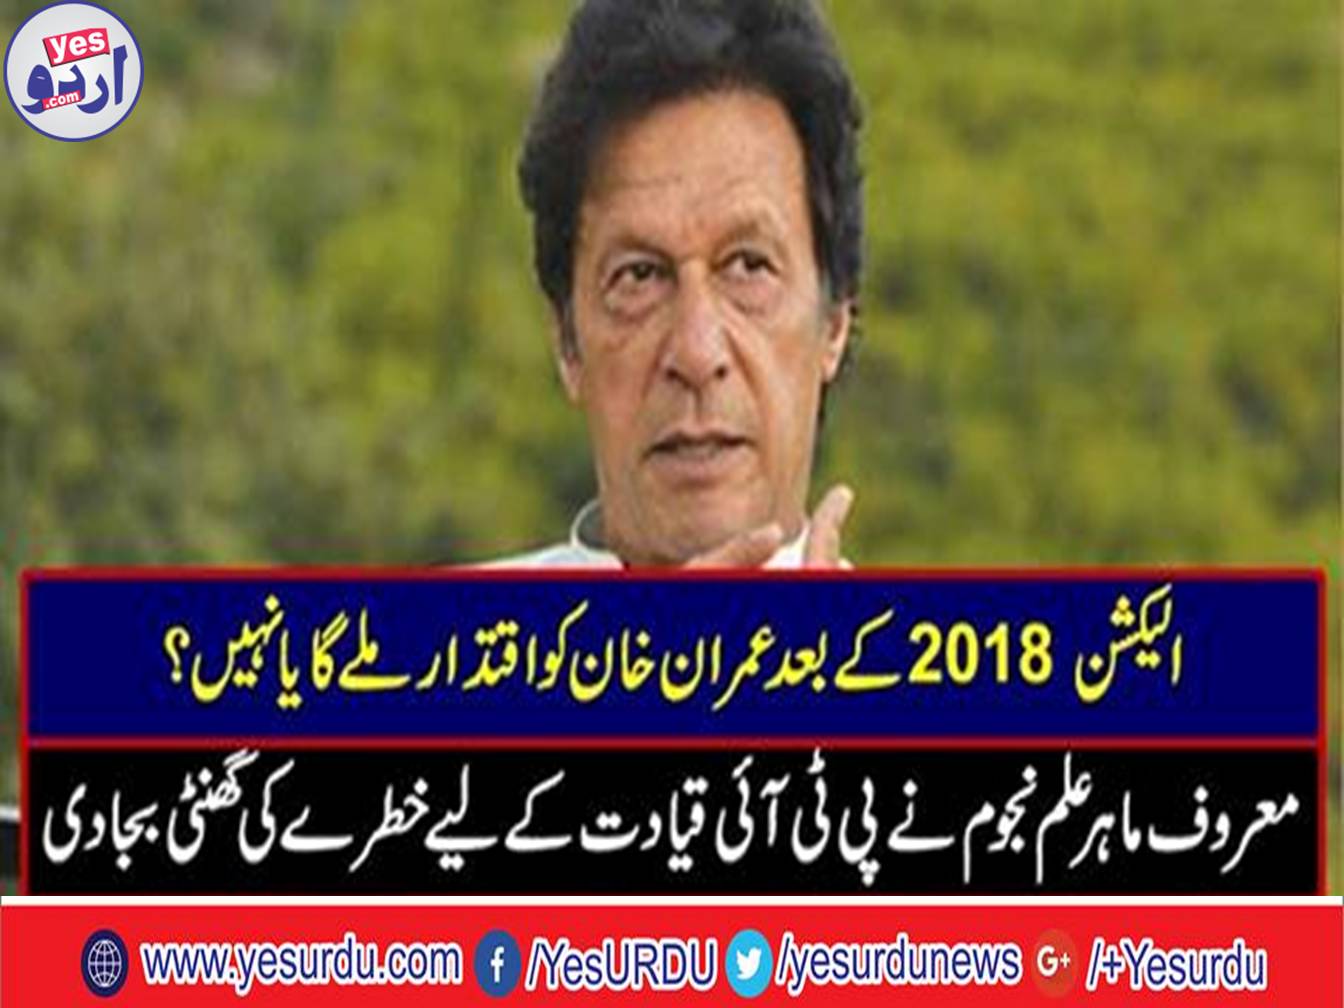 Will the Imran Khan get power after election 2018?